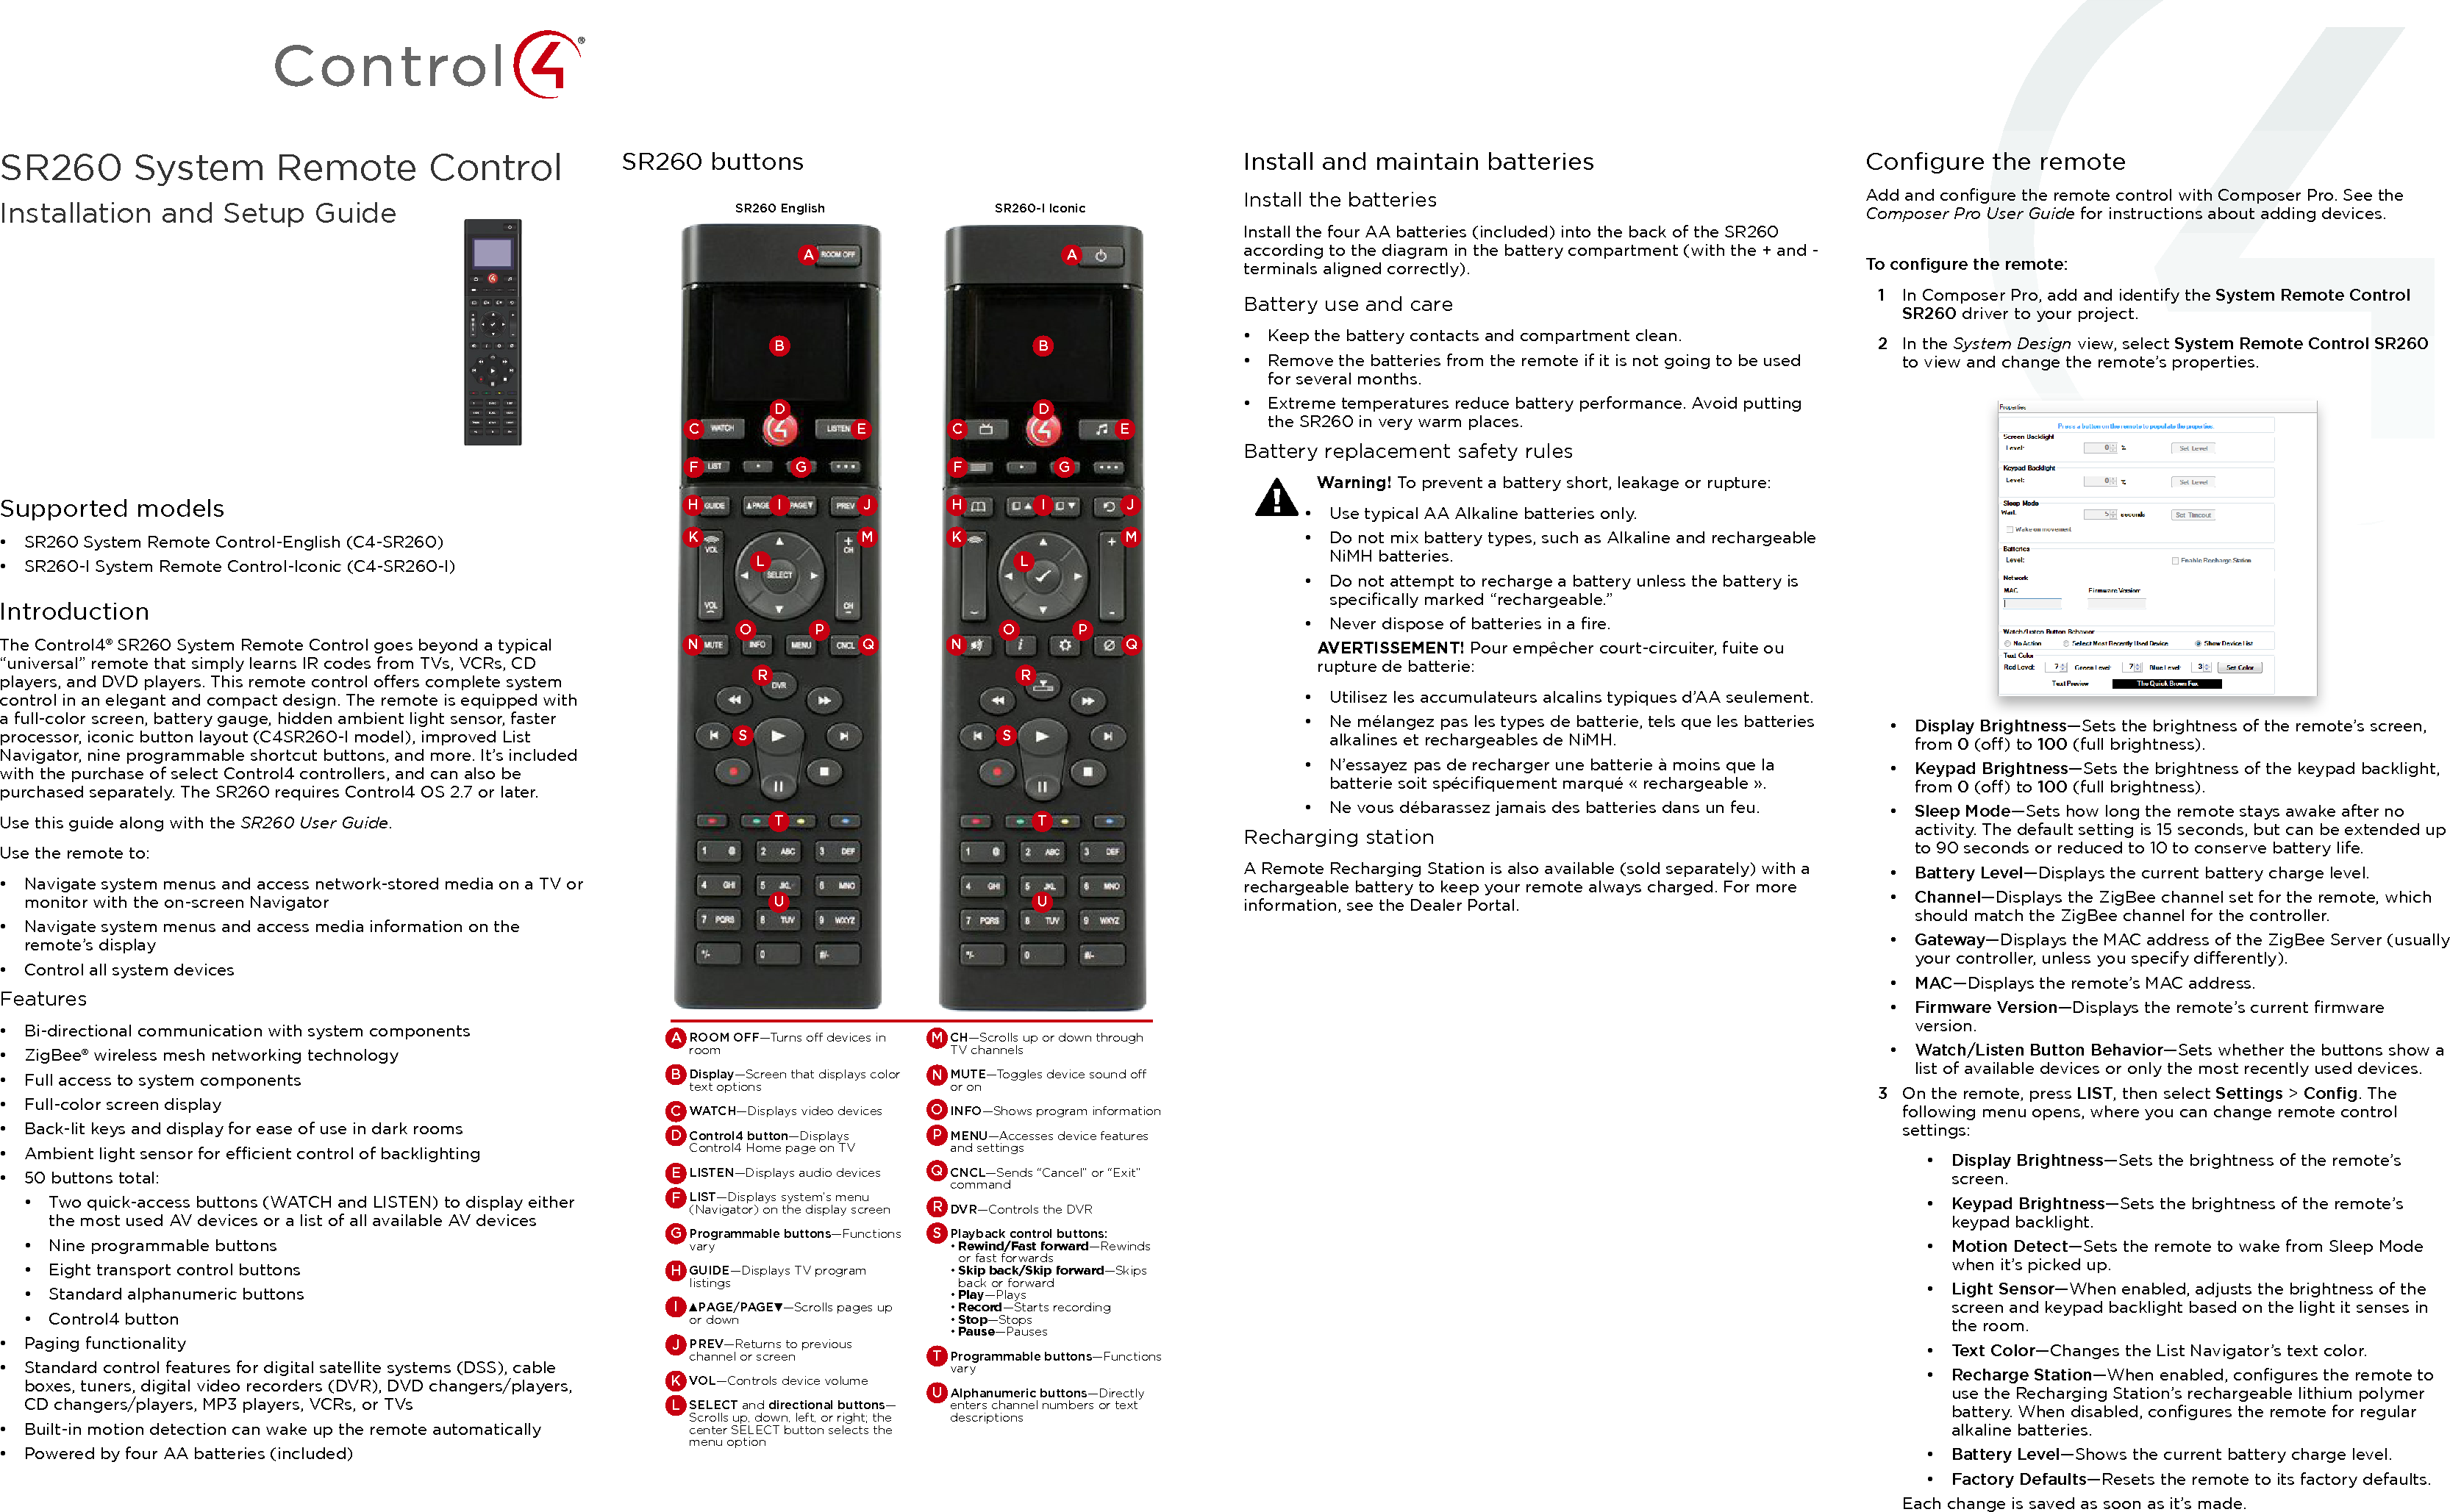 Supported models•  SR260 System Remote Control-English (C4-SR260)•  SR260-I System Remote Control-Iconic (C4-SR260-I)IntroductionThe Control4® SR260 System Remote Control goes beyond a typical “universal” remote that simply learns IR codes from TVs, VCRs, CD players, and DVD players. This remote control oers complete system control in an elegant and compact design. The remote is equipped with a full-color screen, battery gauge, hidden ambient light sensor, faster processor, iconic button layout (C4SR260-I model), improved List Navigator, nine programmable shortcut buttons, and more. It’s included with the purchase of select Control4 controllers, and can also be purchased separately. The SR260 requires Control4 OS 2.7 or later.Use this guide along with the SR260 User Guide.Use the remote to:•  Navigate system menus and access network-stored media on a TV or monitor with the on-screen Navigator•  Navigate system menus and access media information on the remote’s display•  Control all system devicesFeatures•  Bi-directional communication with system components•  ZigBee® wireless mesh networking technology•  Full access to system components•  Full-color screen display•  Back-lit keys and display for ease of use in dark rooms•  Ambient light sensor for ecient control of backlighting•  50 buttons total:•  Two quick-access buttons (WATCH and LISTEN) to display either the most used AV devices or a list of all available AV devices•  Nine programmable buttons•  Eight transport control buttons•  Standard alphanumeric buttons•  Control4 button•  Paging functionality•  Standard control features for digital satellite systems (DSS), cable boxes, tuners, digital video recorders (DVR), DVD changers/players, CD changers/players, MP3 players, VCRs, or TVs•  Built-in motion detection can wake up the remote automatically•  Powered by four AA batteries (included)SR260 buttonsBCDEFHKN QORTUSPMLI JGASR260 EnglishBCDEFHKN QORTUSPMLI JGASR260-I IconicROOM OFF—Turns o devices in roomDisplay—Screen that displays color text optionsWATCH —Displays video devicesControl4 button—Displays Control4 Home page on TVLISTEN—Displays audio devicesLIST—Displays system’s menu (Navigator) on the display screenProgrammable buttons—Functions varyGUIDE—Displays TV program listings▲PAGE/PAGE▼—Scrolls pages up or downPREV—Returns to previous channel or screenVOL—Controls device volumeSELECT and directional buttons—Scrolls up, down, left, or right; the center SELECT button selects the menu optionAJDGBKEHCLFICH—Scrolls up or down through TV channelsMUTE—Toggles device sound o or onINFO—Shows program informationMENU—Accesses device features and settingsCNCL—Sends “Cancel” or “Exit” commandDVR—Controls the DVRPlayback control buttons:• Rewind/Fast forward—Rewinds or fast forwards• Skip back/Skip forward—Skips back or forward• Play—Plays• Record—Starts recording• Stop—Stops• Pause—PausesProgrammable buttons—Functions varyAlphanumeric buttons—Directly enters channel numbers or text descriptionsONMRPSTUQInstall and maintain batteriesInstall the batteriesInstall the four AA batteries (included) into the back of the SR260 according to the diagram in the battery compartment (with the + and - terminals aligned correctly).Battery use and care•  Keep the battery contacts and compartment clean.•  Remove the batteries from the remote if it is not going to be used for several months.•  Extreme temperatures reduce battery performance. Avoid putting the SR260 in very warm places.Battery replacement safety rulesWarning! To prevent a battery short, leakage or rupture:•  Use typical AA Alkaline batteries only.•  Do not mix battery types, such as Alkaline and rechargeable NiMH batteries.•  Do not attempt to recharge a battery unless the battery is speciﬁcally marked “rechargeable.”•  Never dispose of batteries in a ﬁre.AVERTISSEMENT! Pour empêcher court-circuiter, fuite ou rupture de batterie:•  Utilisez les accumulateurs alcalins typiques d’AA seulement.•  Ne mélangez pas les types de batterie, tels que les batteries alkalines et rechargeables de NiMH.•  N’essayez pas de recharger une batterie à moins que la batterie soit spéciﬁquement marqué « rechargeable ».•  Ne vous débarassez jamais des batteries dans un feu.Recharging stationA Remote Recharging Station is also available (sold separately) with a rechargeable battery to keep your remote always charged. For more information, see the Dealer Portal.Conﬁgure the remoteAdd and conﬁgure the remote control with Composer Pro. See the Composer Pro User Guide for instructions about adding devices.To conﬁgure the remote:1  In Composer Pro, add and identify the System Remote Control SR260 driver to your project.2  In the System Design view, select System Remote Control SR260 to view and change the remote’s properties.•  Display Brightness—Sets the brightness of the remote’s screen, from 0 (o) to 100 (full brightness).•  Keypad Brightness—Sets the brightness of the keypad backlight, from 0 (o) to 100 (full brightness).•  Sleep Mode—Sets how long the remote stays awake after no activity. The default setting is 15 seconds, but can be extended up to 90 seconds or reduced to 10 to conserve battery life.•  Battery Level—Displays the current battery charge level.•  Channel—Displays the ZigBee channel set for the remote, which should match the ZigBee channel for the controller.•  Gateway—Displays the MAC address of the ZigBee Server (usually your controller, unless you specify dierently).•  MAC—Displays the remote’s MAC address.•  Firmware Version—Displays the remote’s current ﬁrmware version.•  Watch/Listen Button Behavior—Sets whether the buttons show a list of available devices or only the most recently used devices.3  On the remote, press LIST, then select Settings &gt; Conﬁg. The following menu opens, where you can change remote control settings:•  Display Brightness—Sets the brightness of the remote’s screen.•  Keypad Brightness—Sets the brightness of the remote’s keypad backlight.•  Motion Detect—Sets the remote to wake from Sleep Mode when it’s picked up.•  Light Sensor—When enabled, adjusts the brightness of the screen and keypad backlight based on the light it senses in the room.•  Text Color—Changes the List Navigator’s text color.•  Recharge Station—When enabled, conﬁgures the remote to use the Recharging Station’s rechargeable lithium polymer battery. When disabled, conﬁgures the remote for regular alkaline batteries.•  Battery Level—Shows the current battery charge level.•  Factory Defaults—Resets the remote to its factory defaults.Each change is saved as soon as it’s made.SR260 System Remote ControlInstallation and Setup Guide